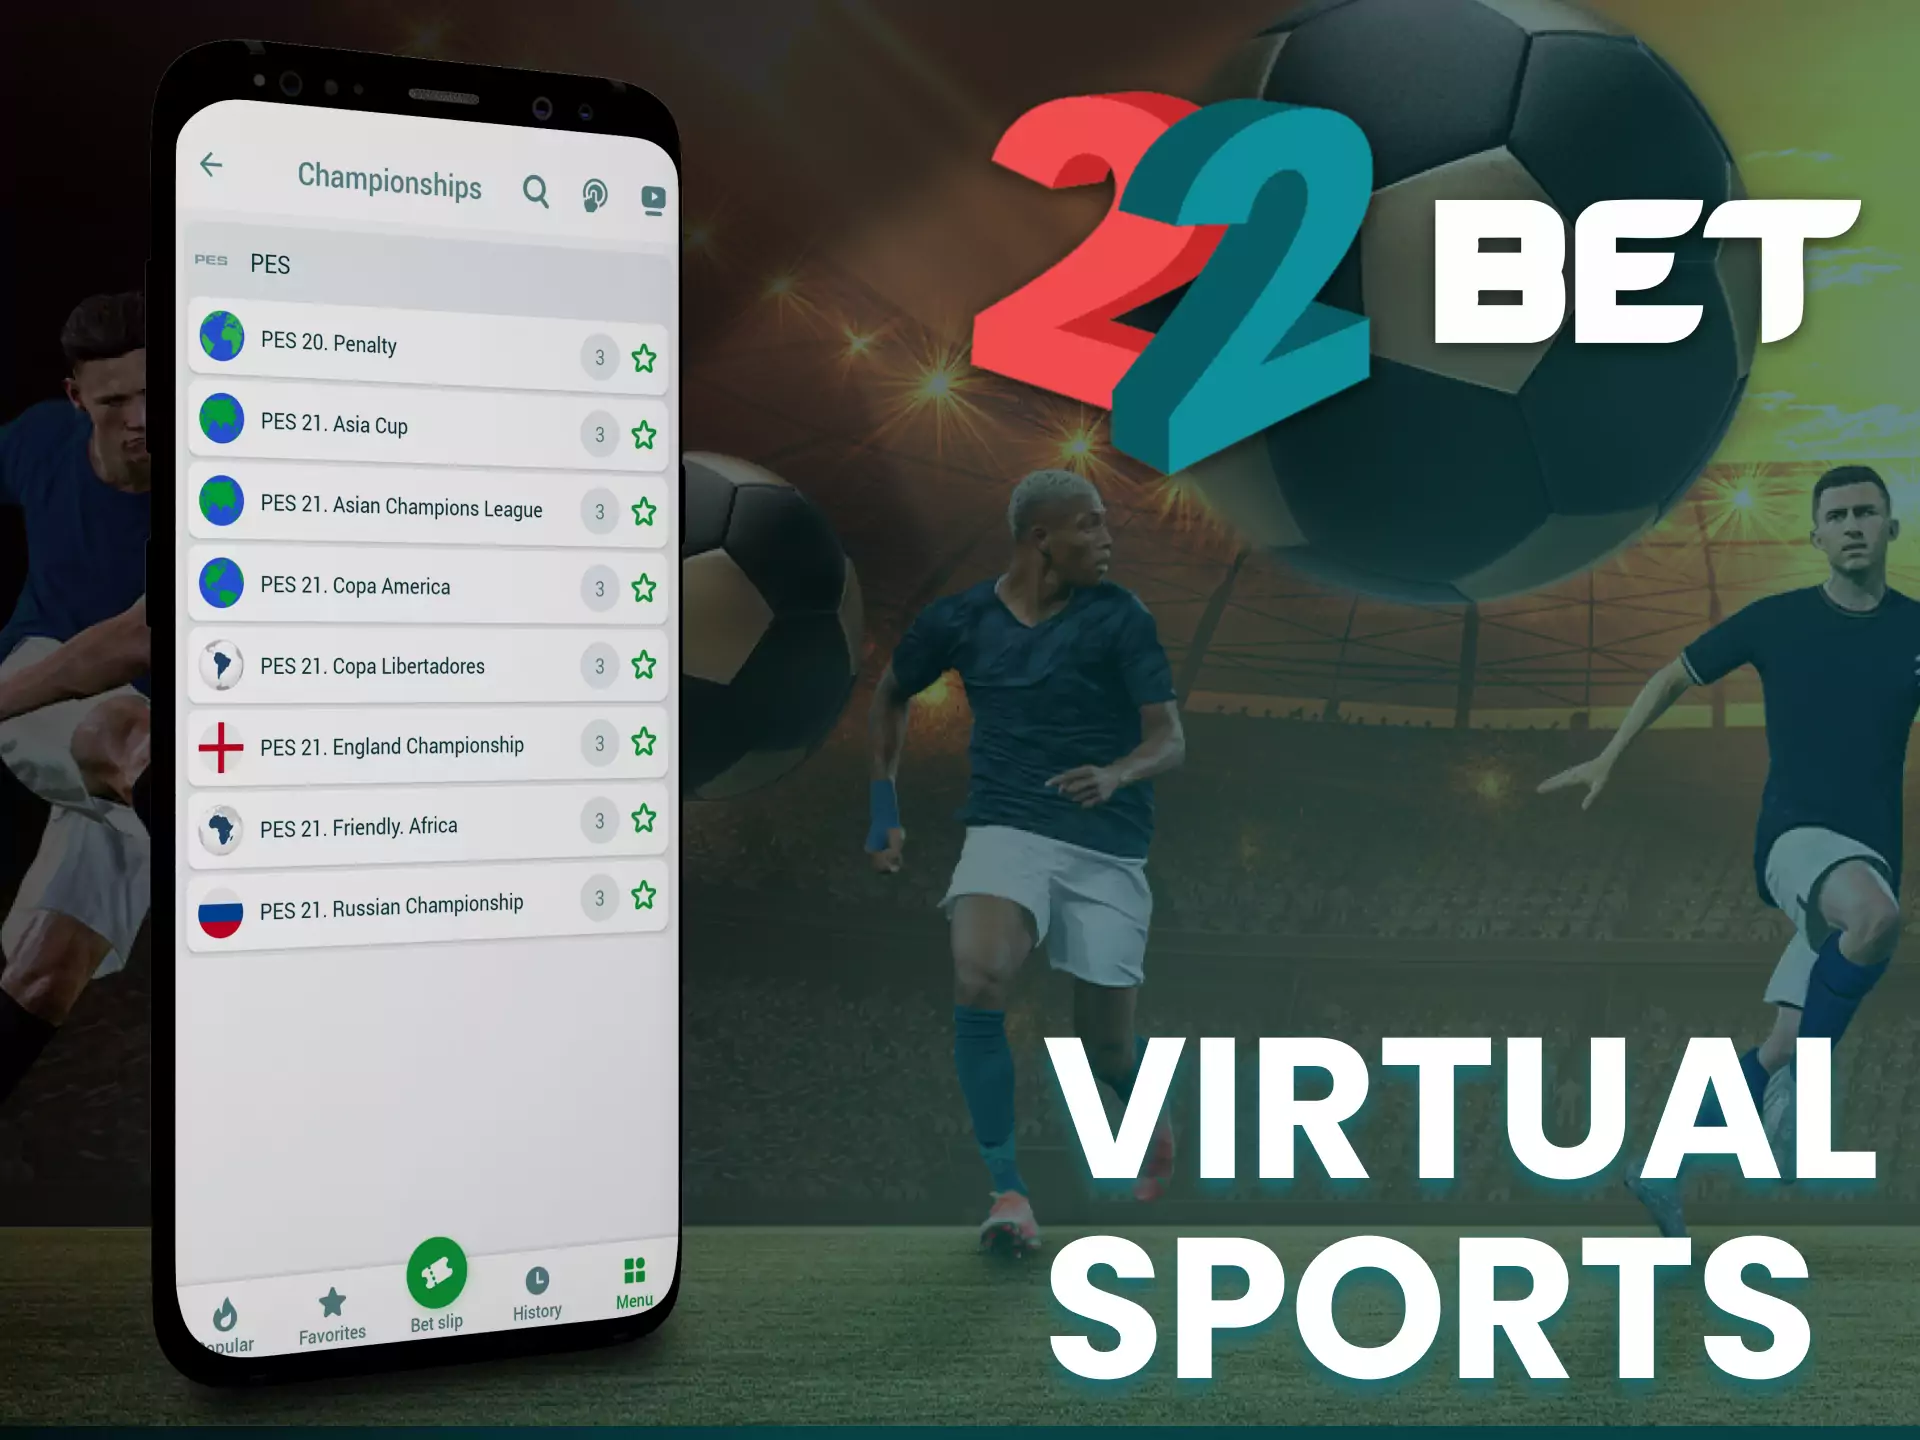 With 22bet, bet on virtual sports.